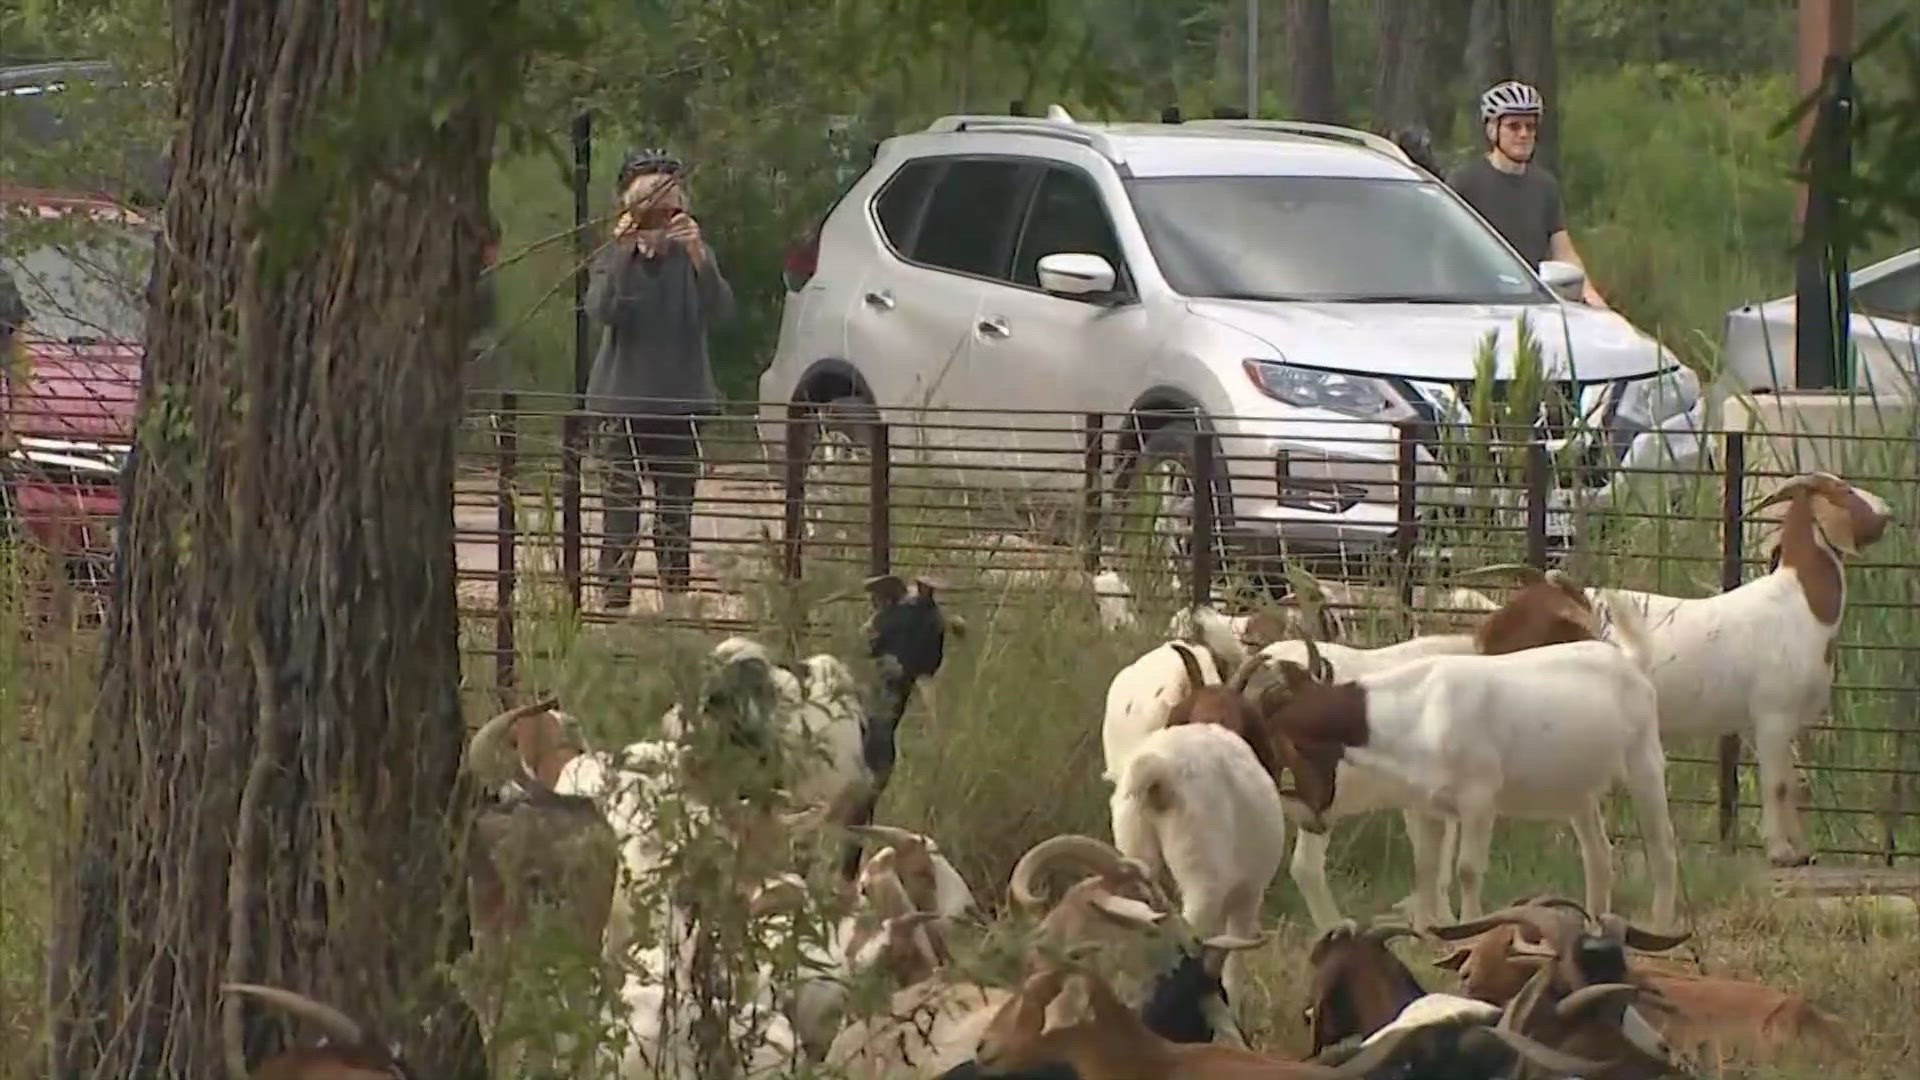 It's not the first time goats have been used to clear brush.